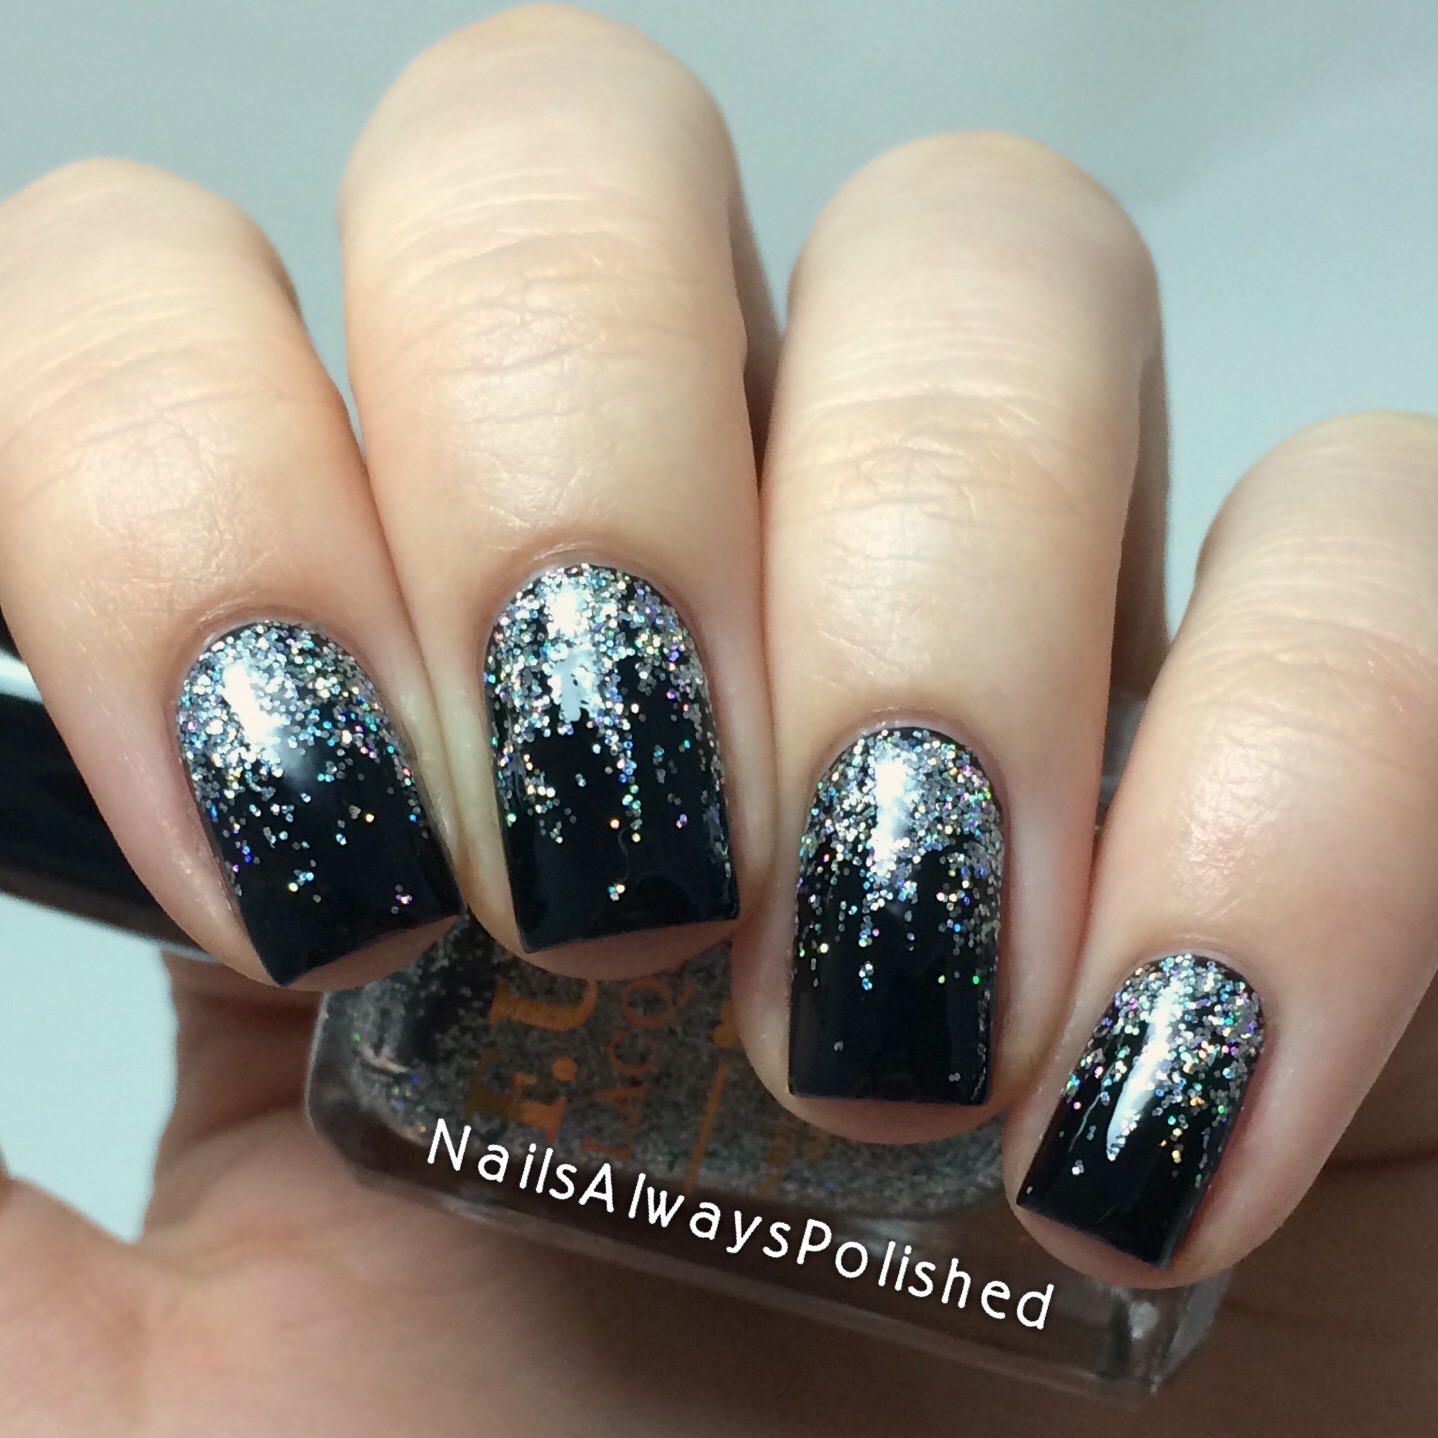 Nails Always Polished: New Year's Eve